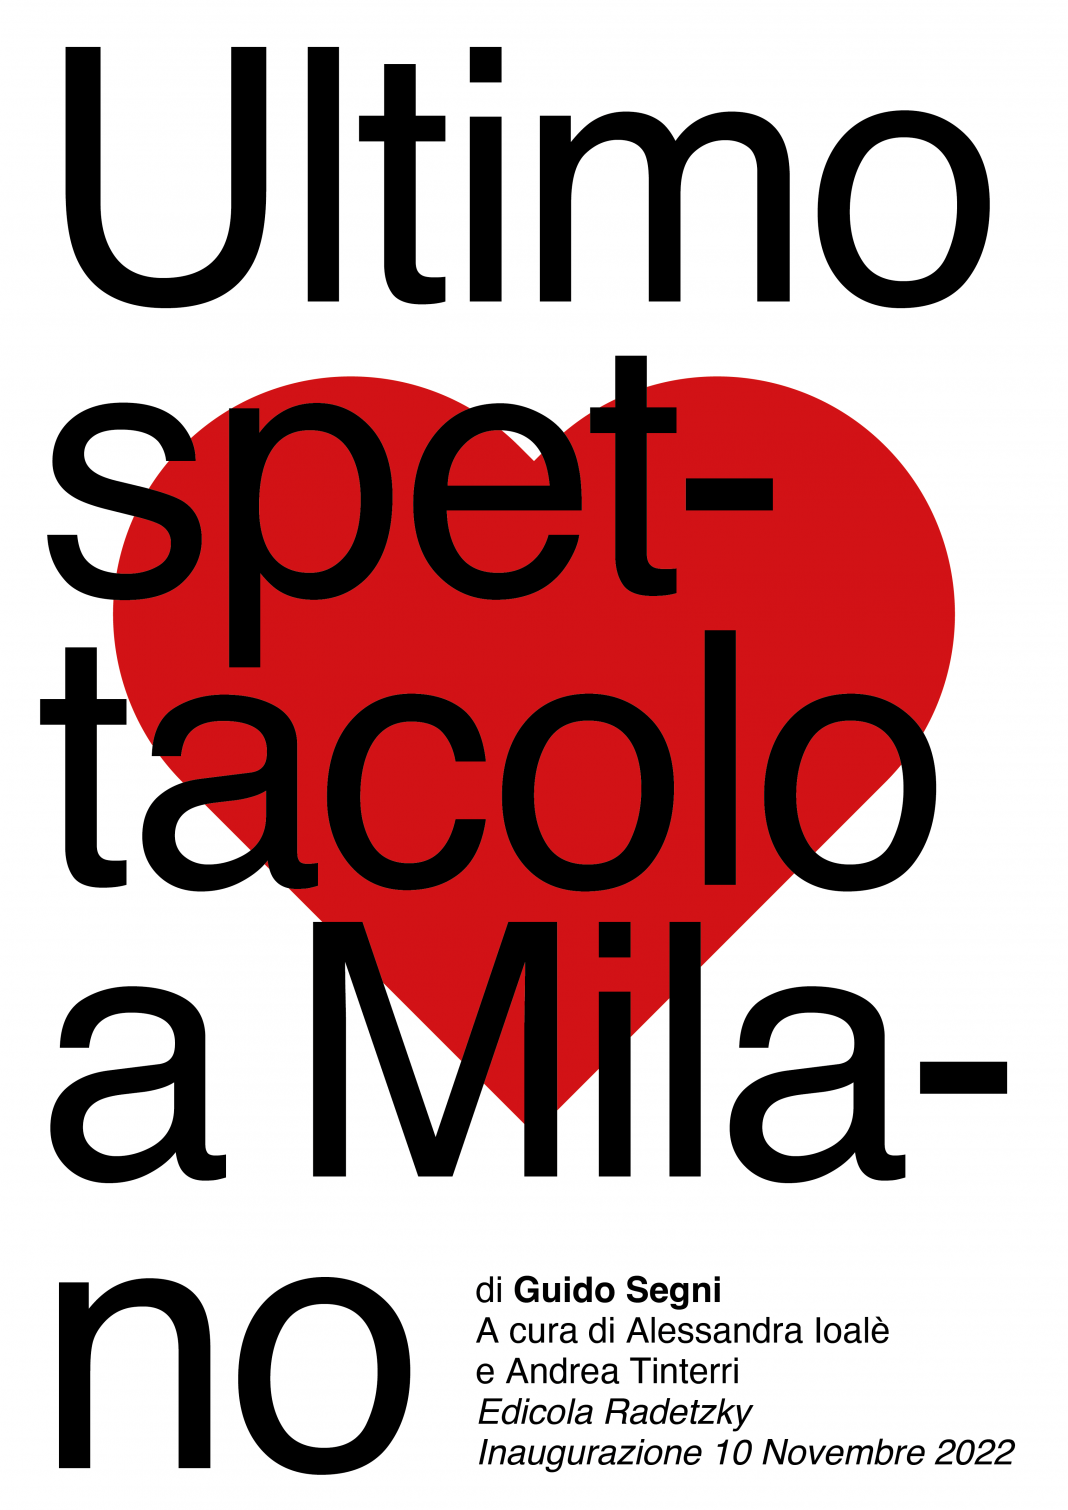 Guido Segni – ULTIMO SPETTACOLO A MILANOhttps://www.exibart.com/repository/media/formidable/11/img/2f4/Locandina_Guido_Segni_Ultimo_spettacolo_a_Milano-1068x1510.png